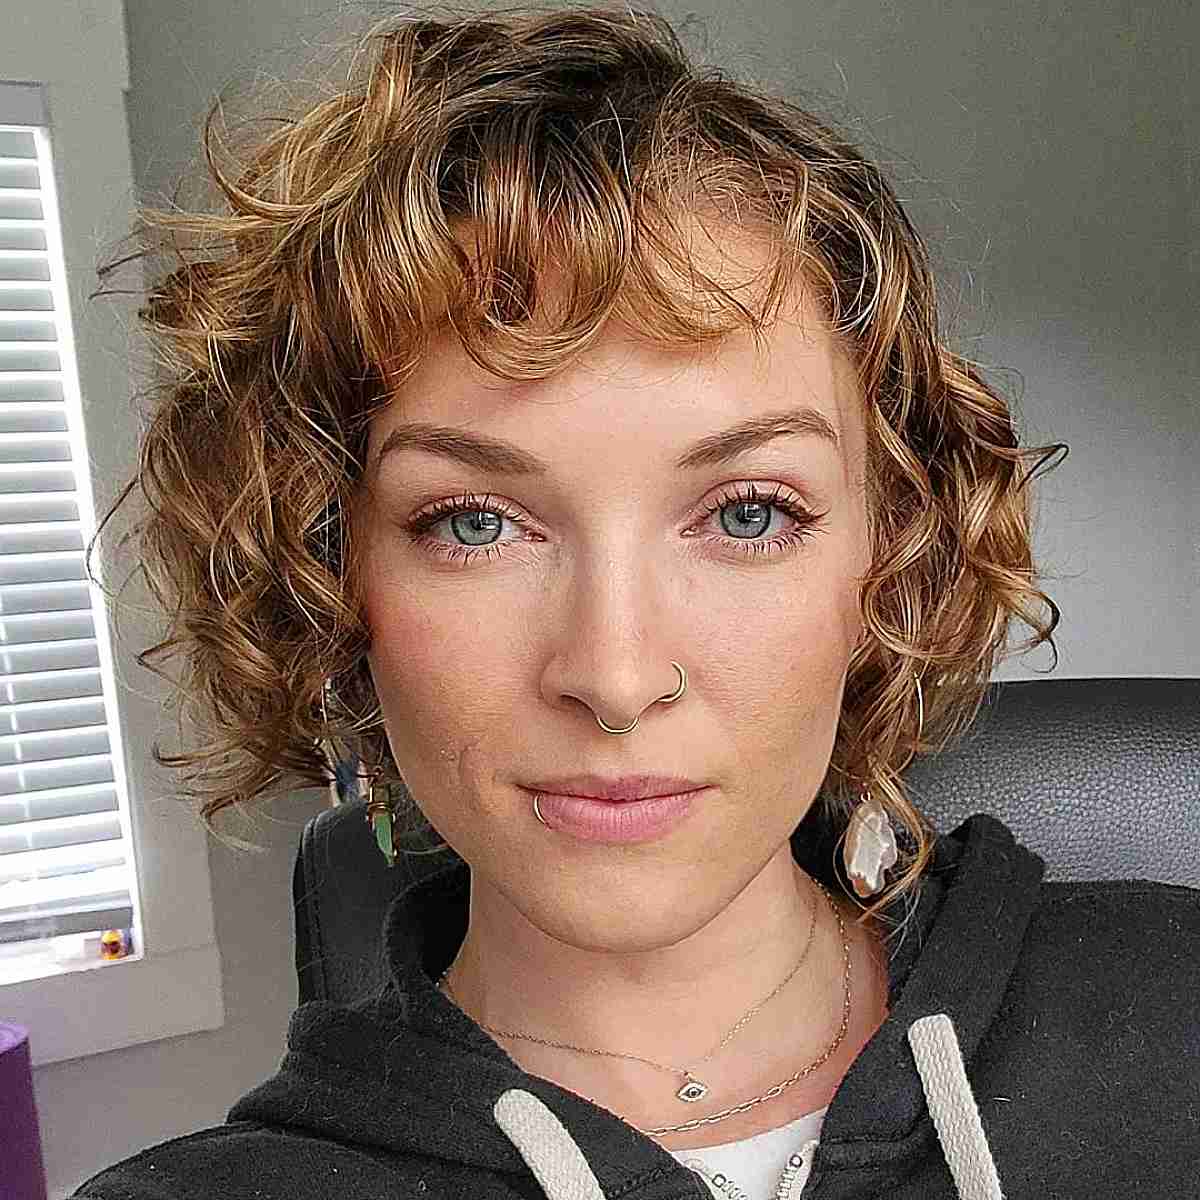 Chin-Length Side-Parted Asymmetrical Cut on Loose Curly Wavy Hair